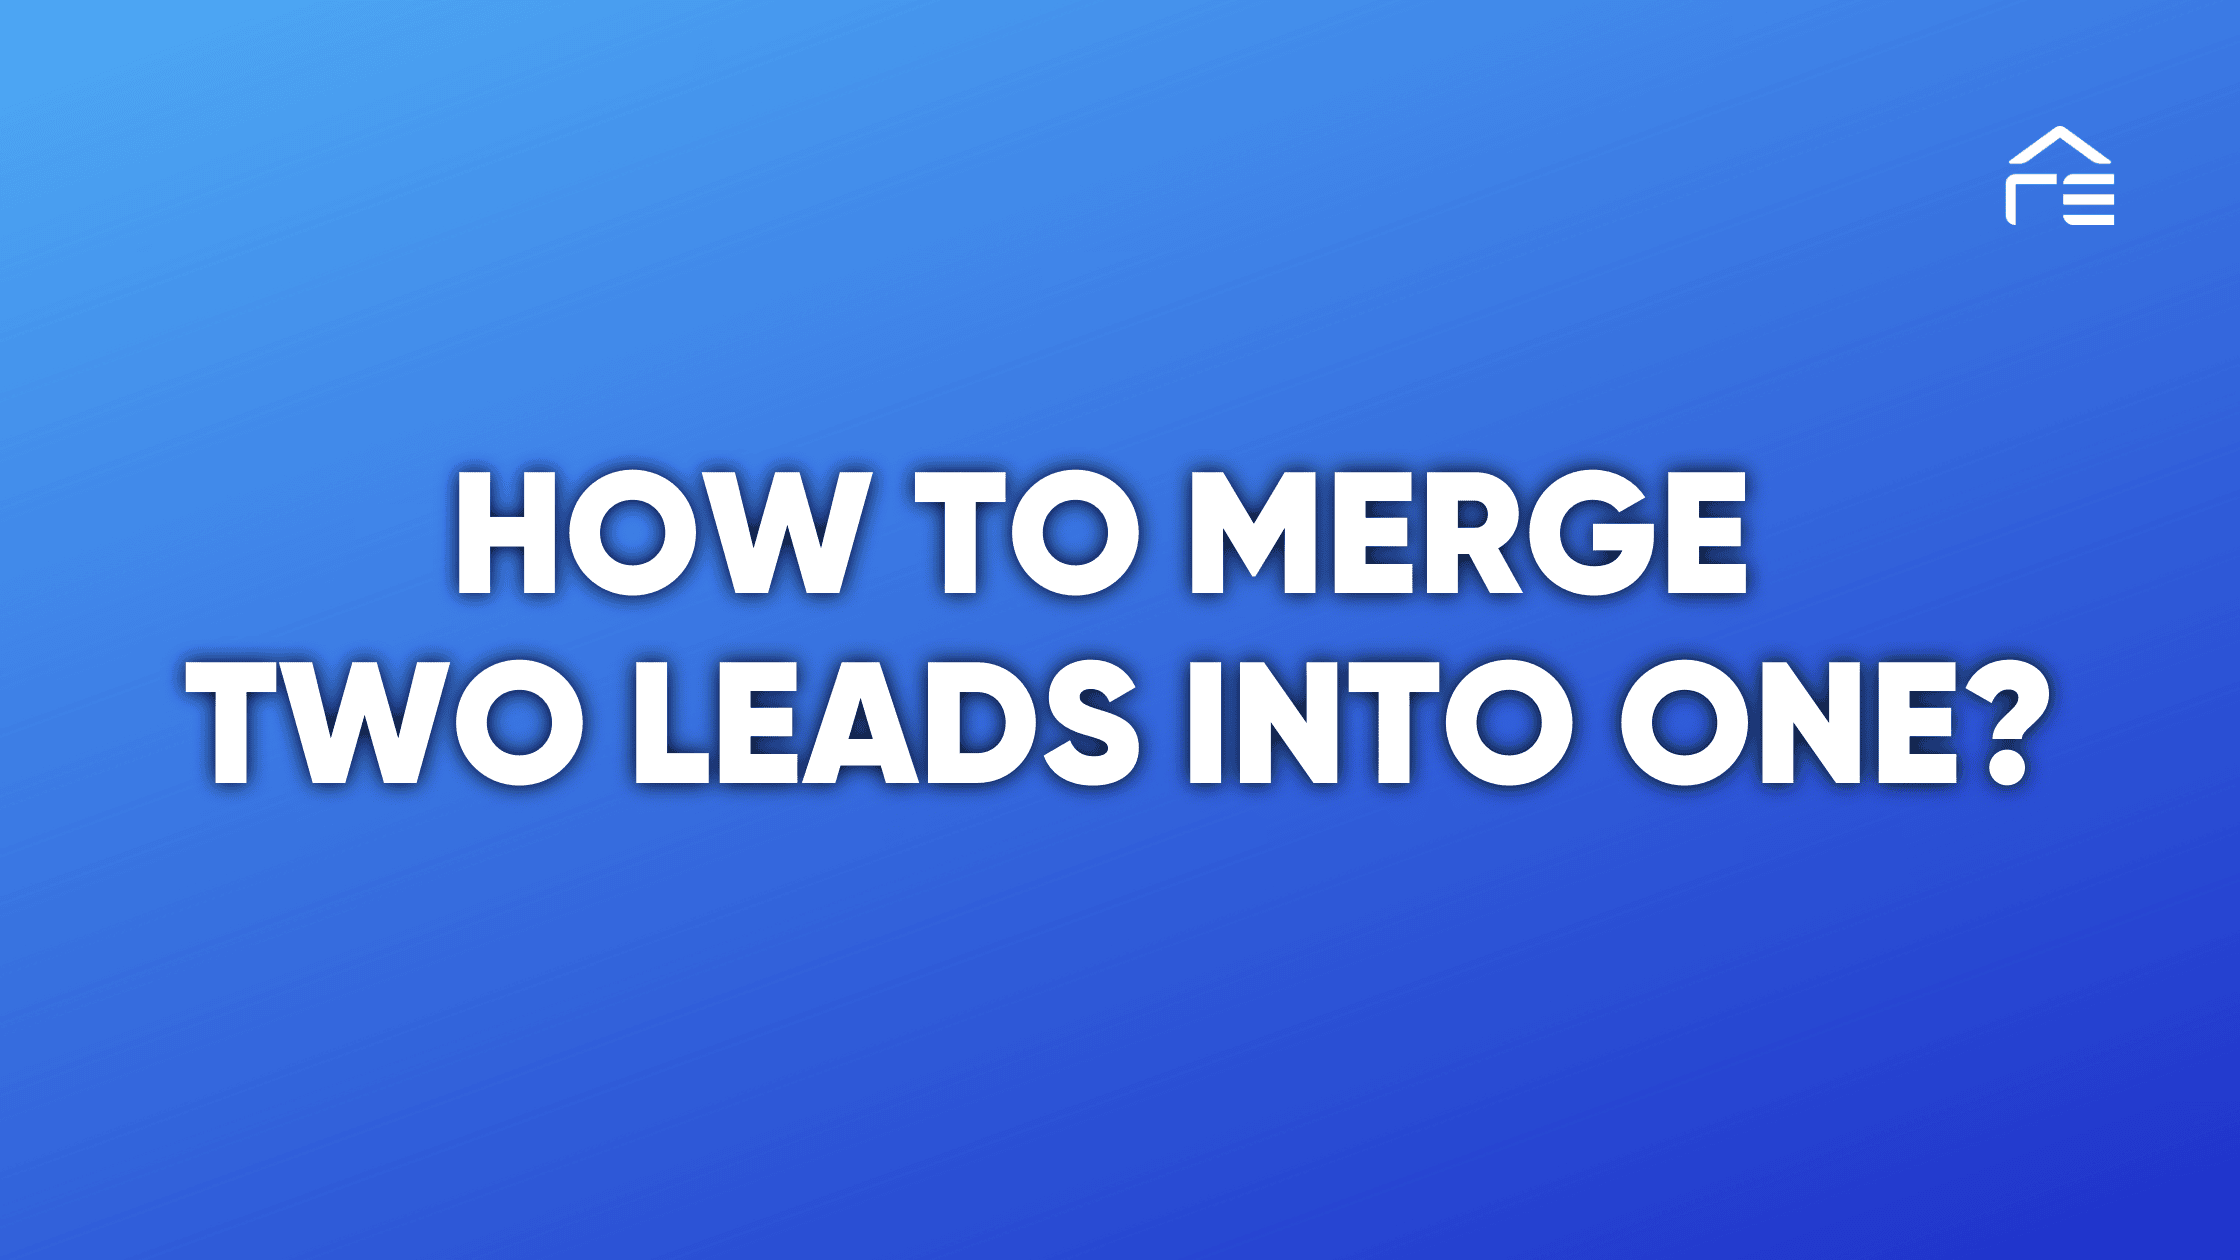 How to Merge Two Leads into One?